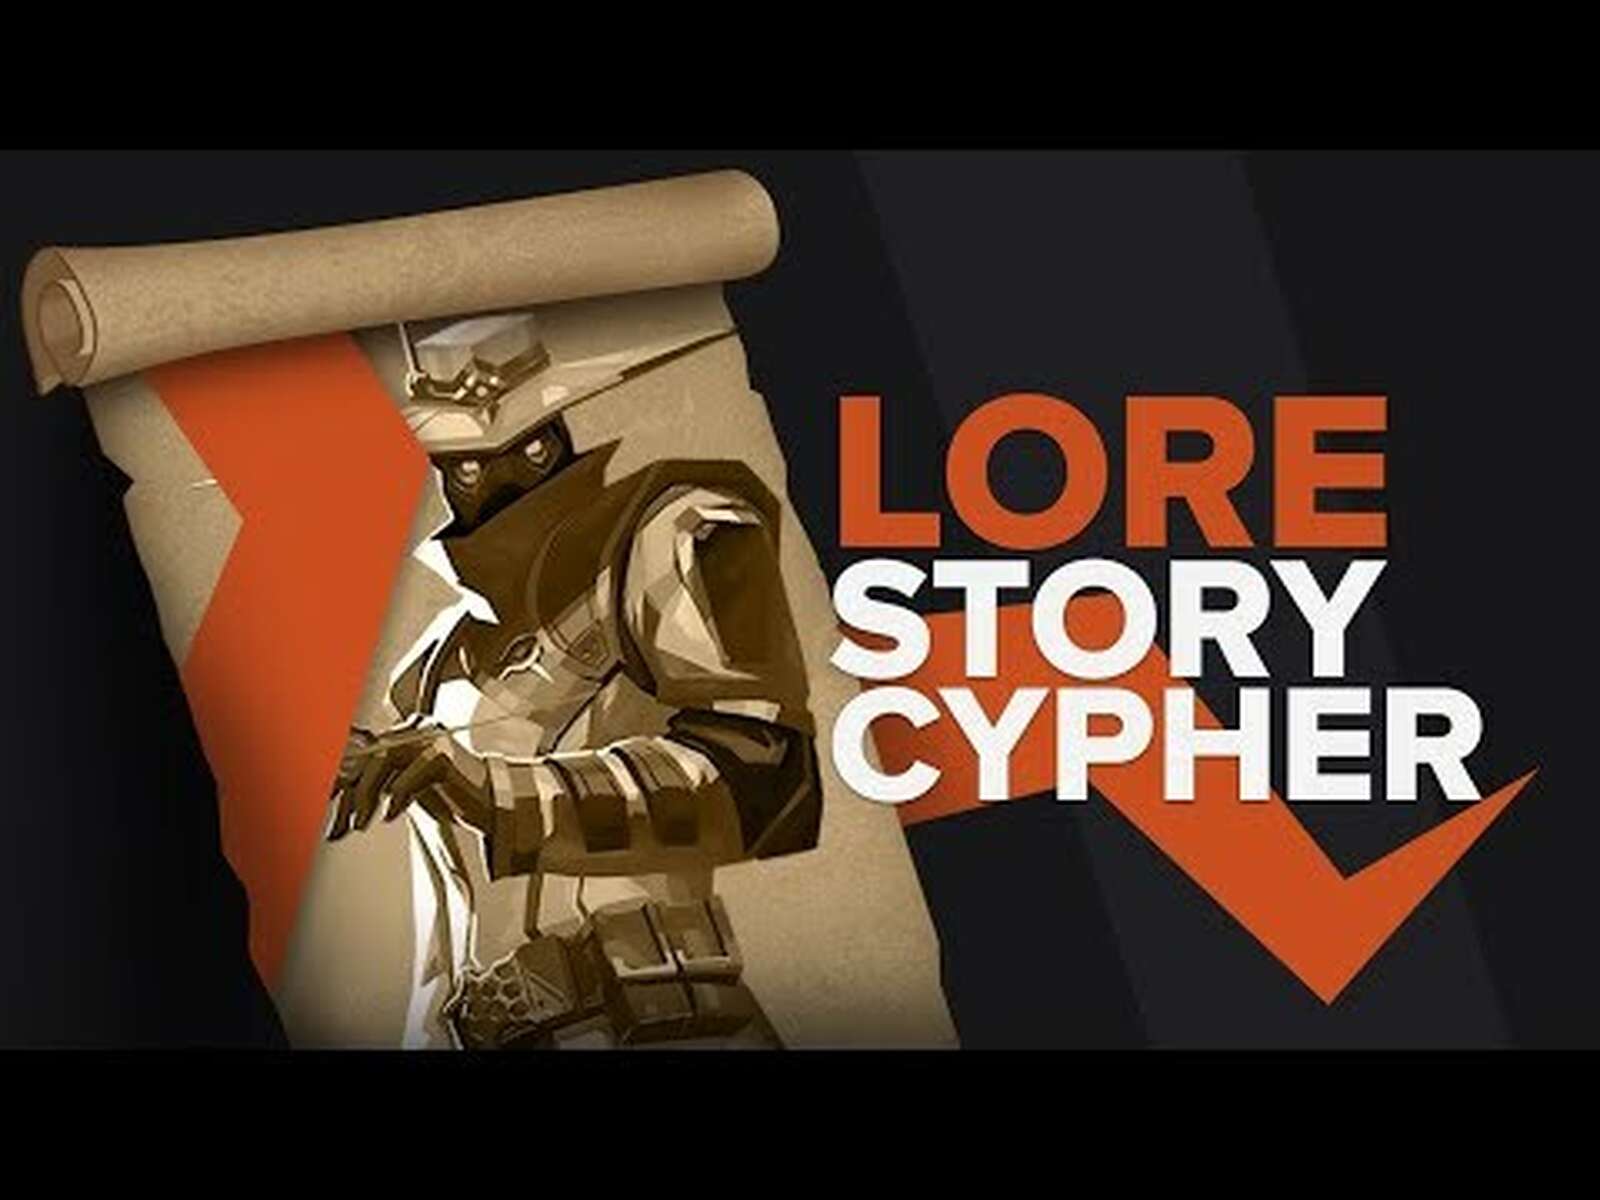 Cypher Lore Story Explained | What we know so far